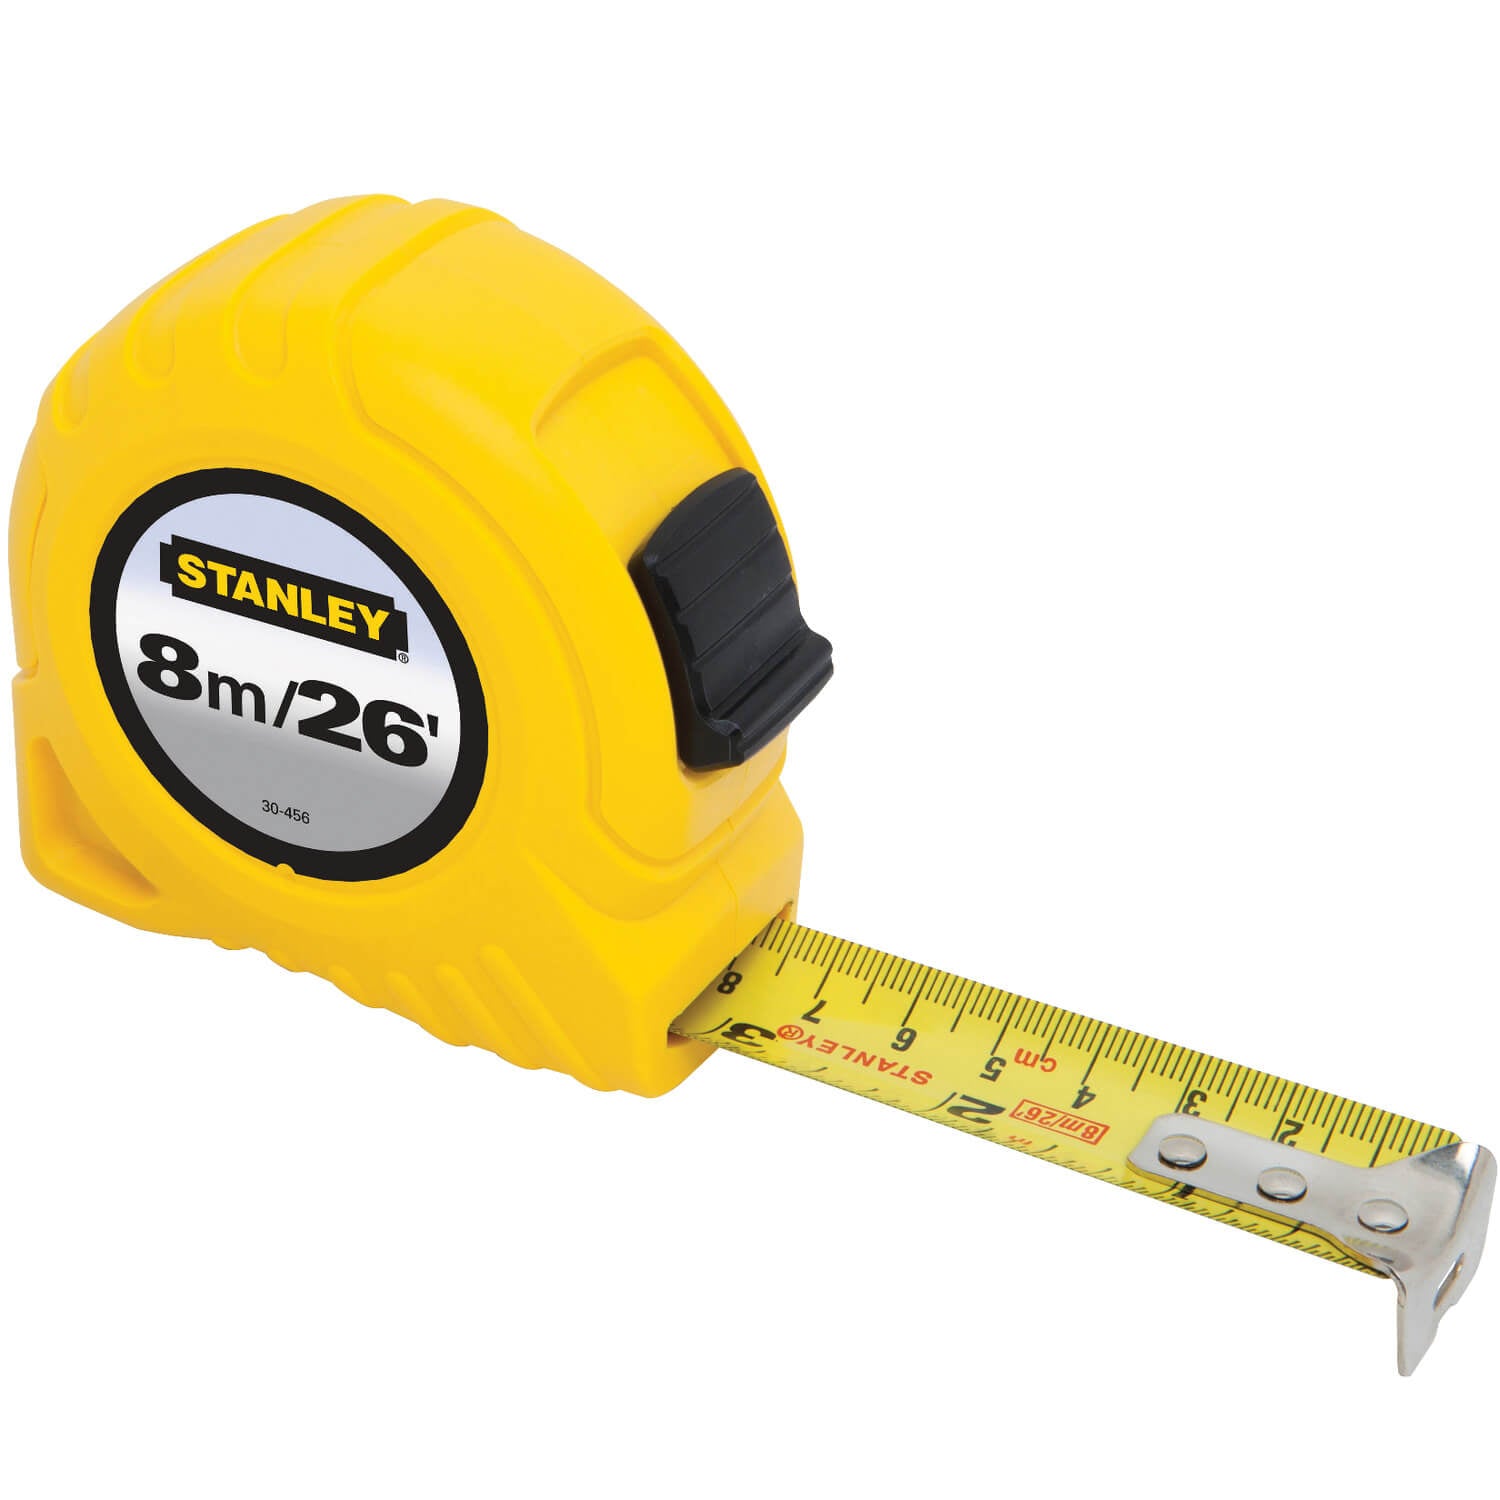 STANLEY  30-456 - 8M/26 FT TAPE MEASURE - wise-line-tools